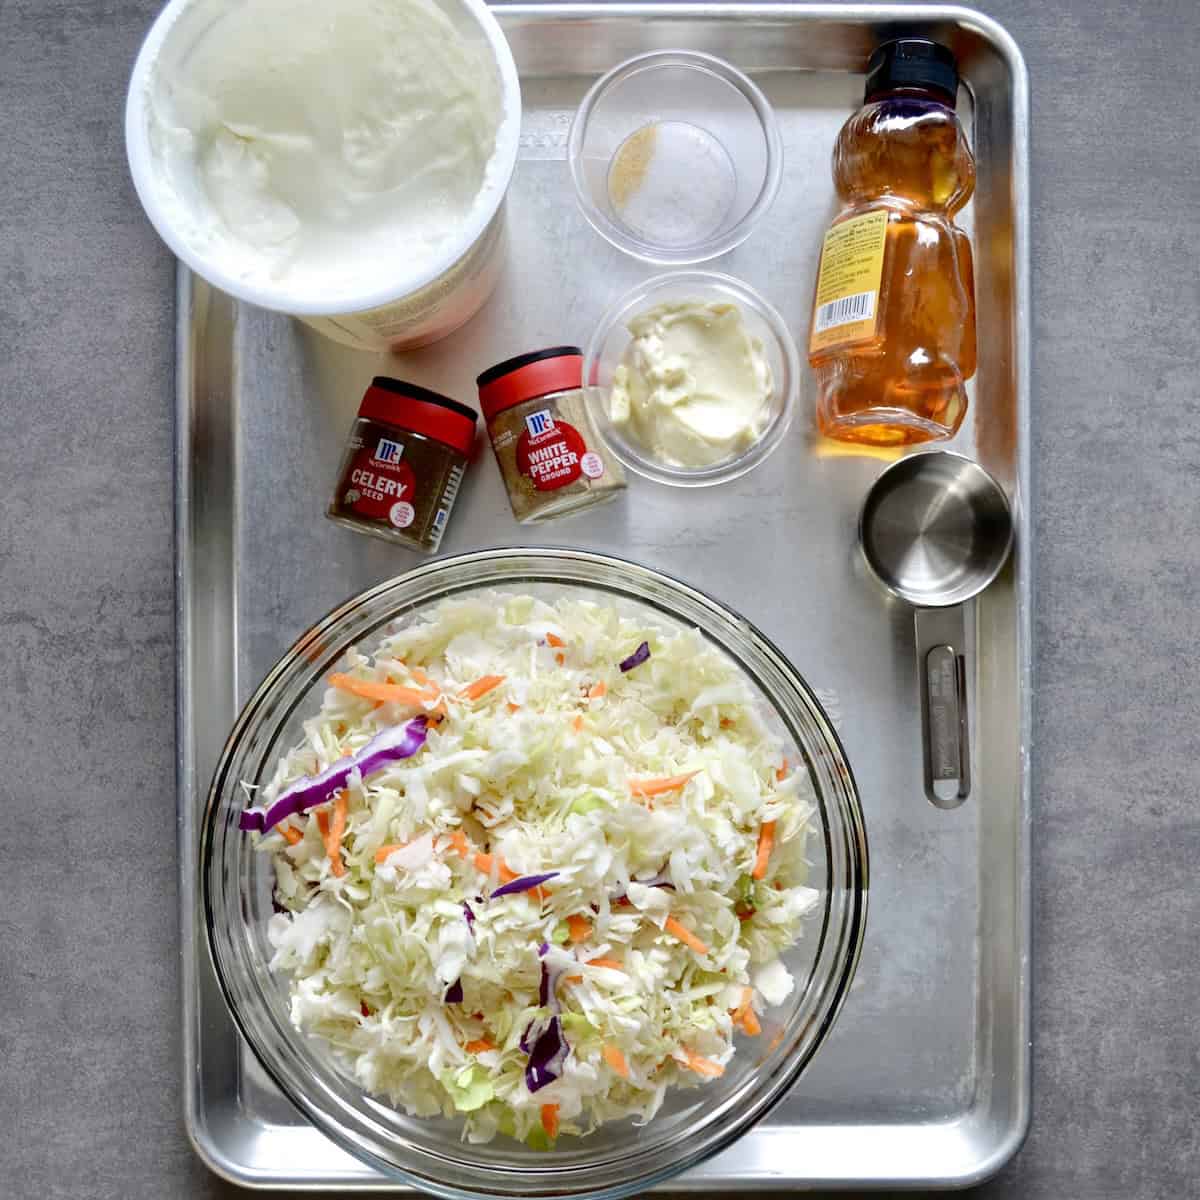 Ingredients for making homemade coleslaw